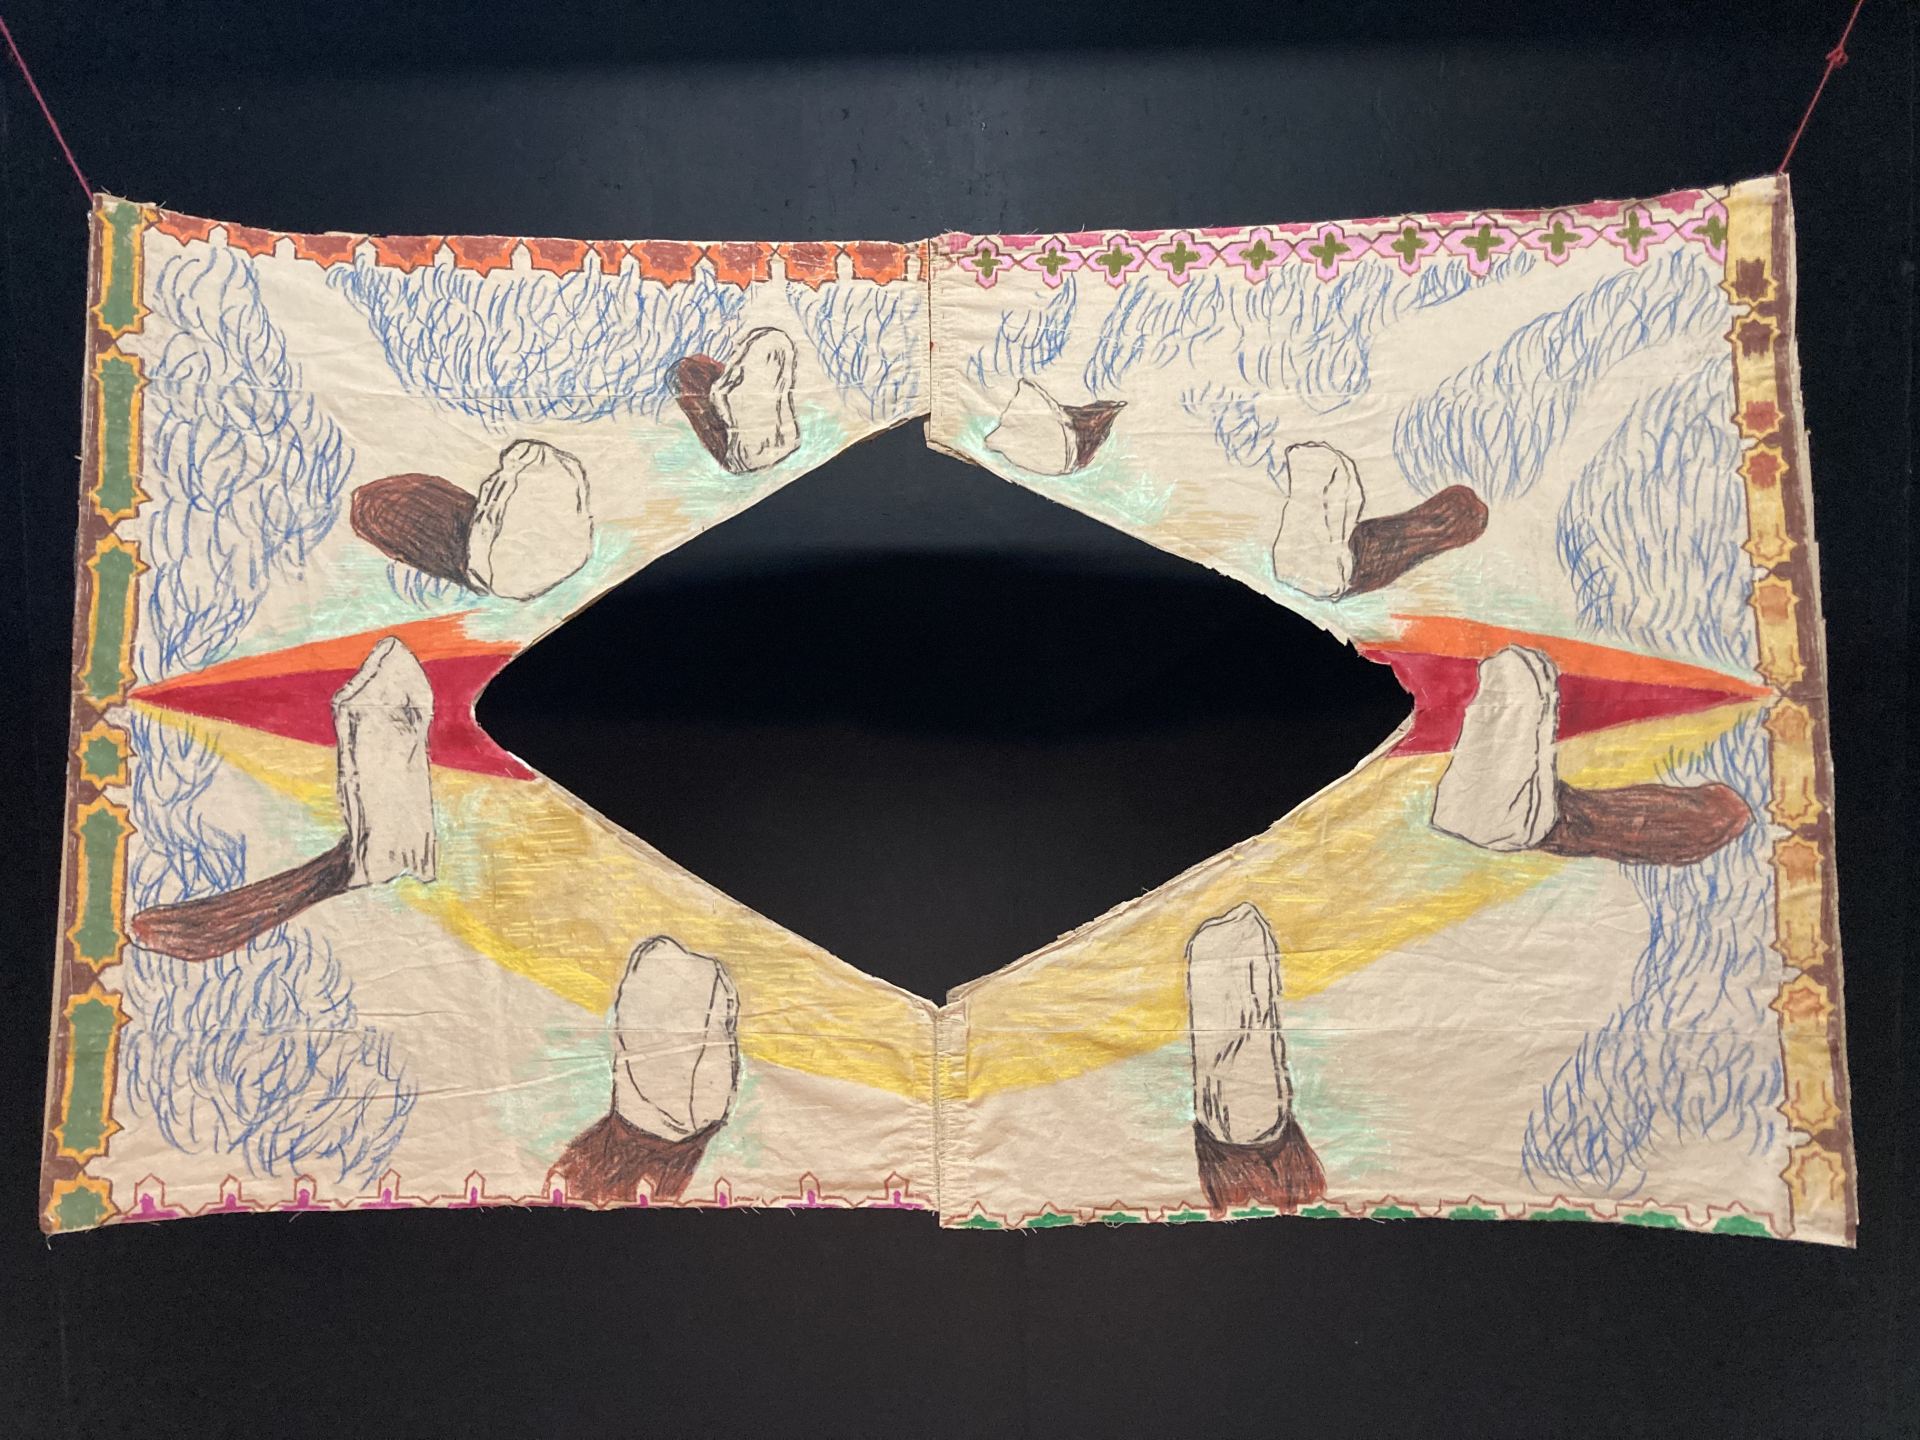 An oil pastel drawing of a stone circle with shadows on a pair of shalwar (trousers), stitched onto cardboard with decorative motifs around border.